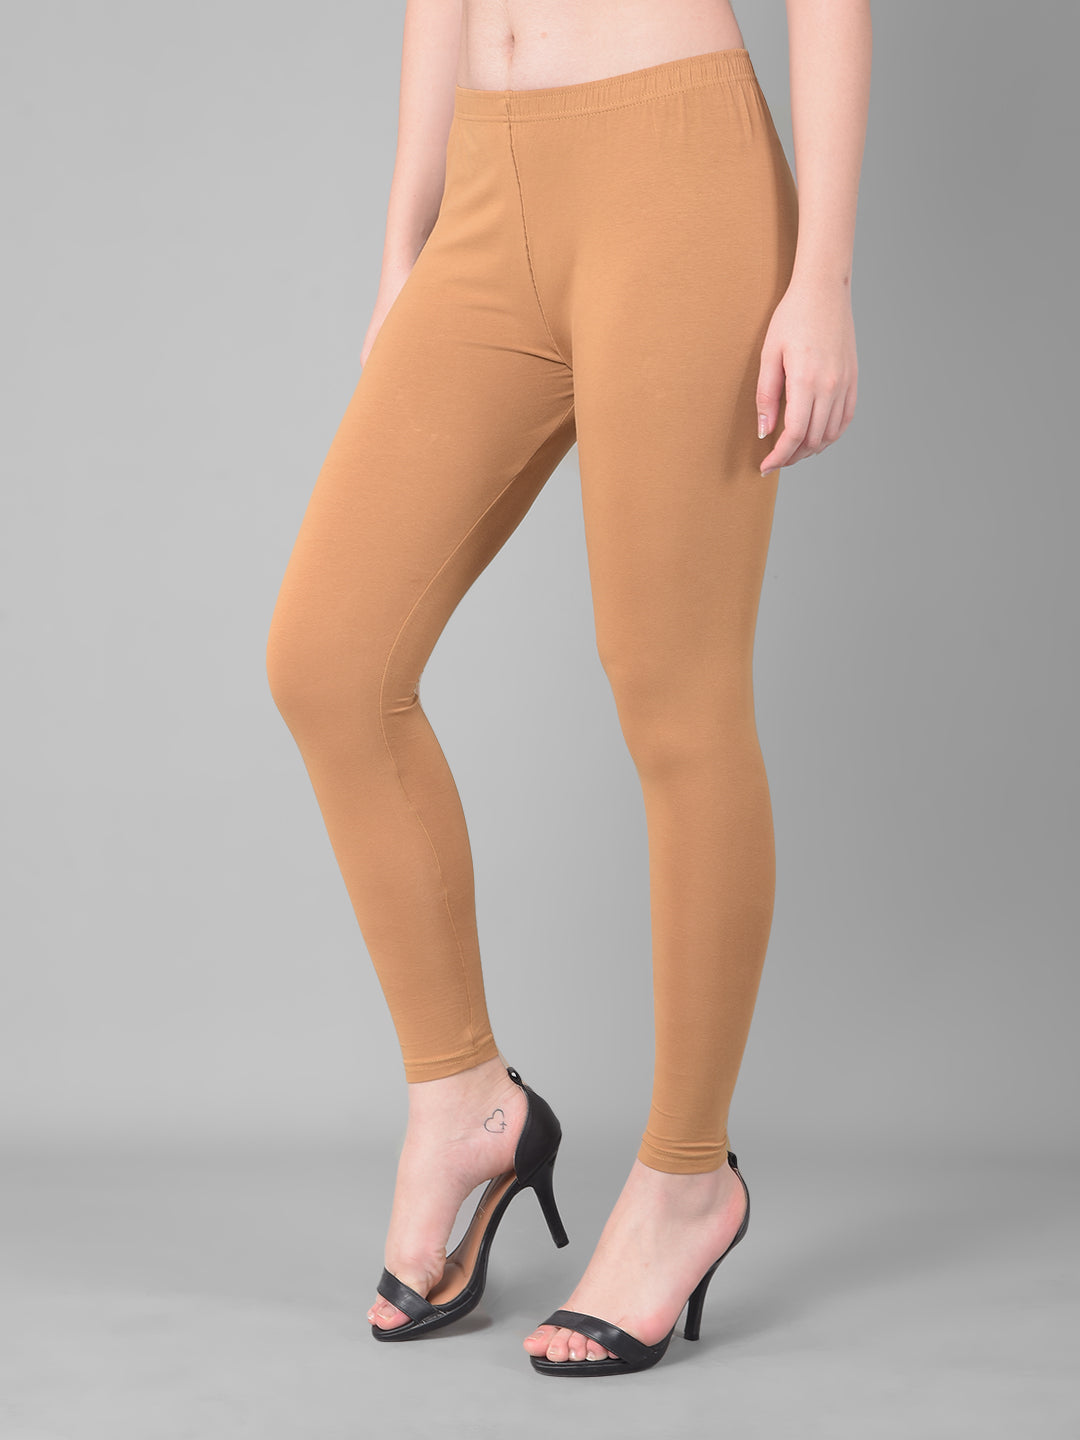 Comfort Lady Leggings - Play with Colors | Facebook